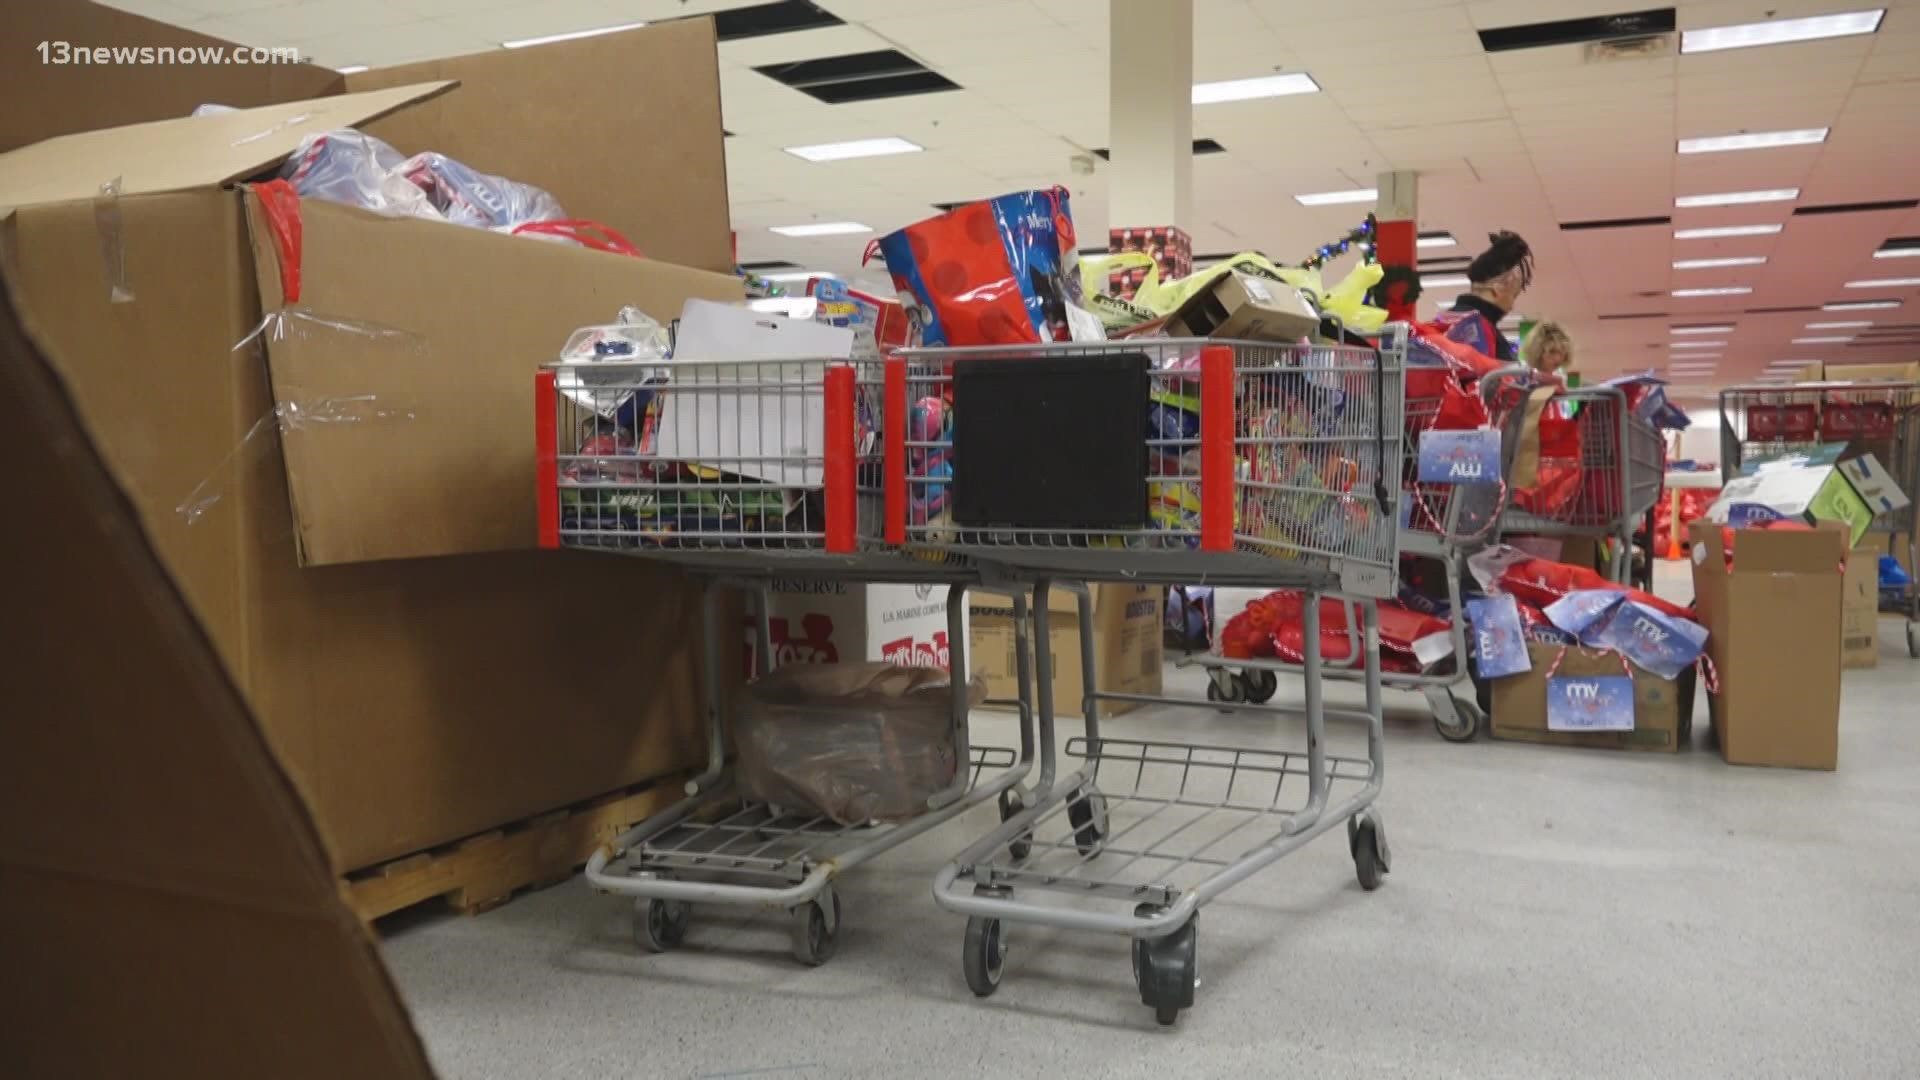 Thousands of families have applied for Christmas assistance and the Salvation Army is still looking for more!